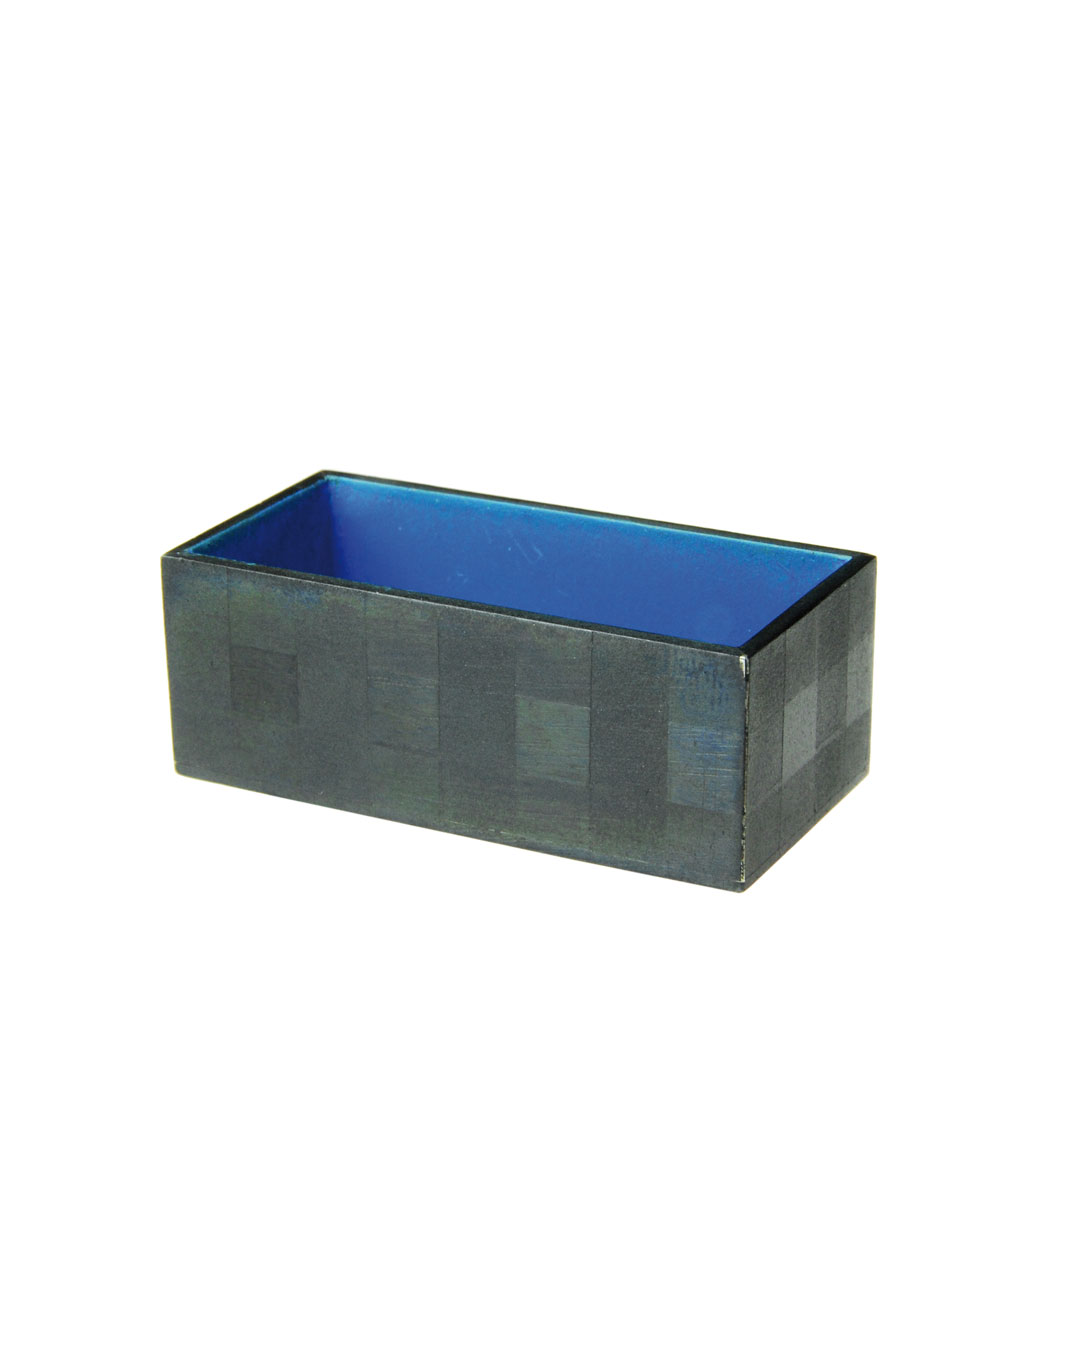 Tore Svensson, Box, 2009, brooch; etched and painted steel, 40 x 20 x 15 mm, €485